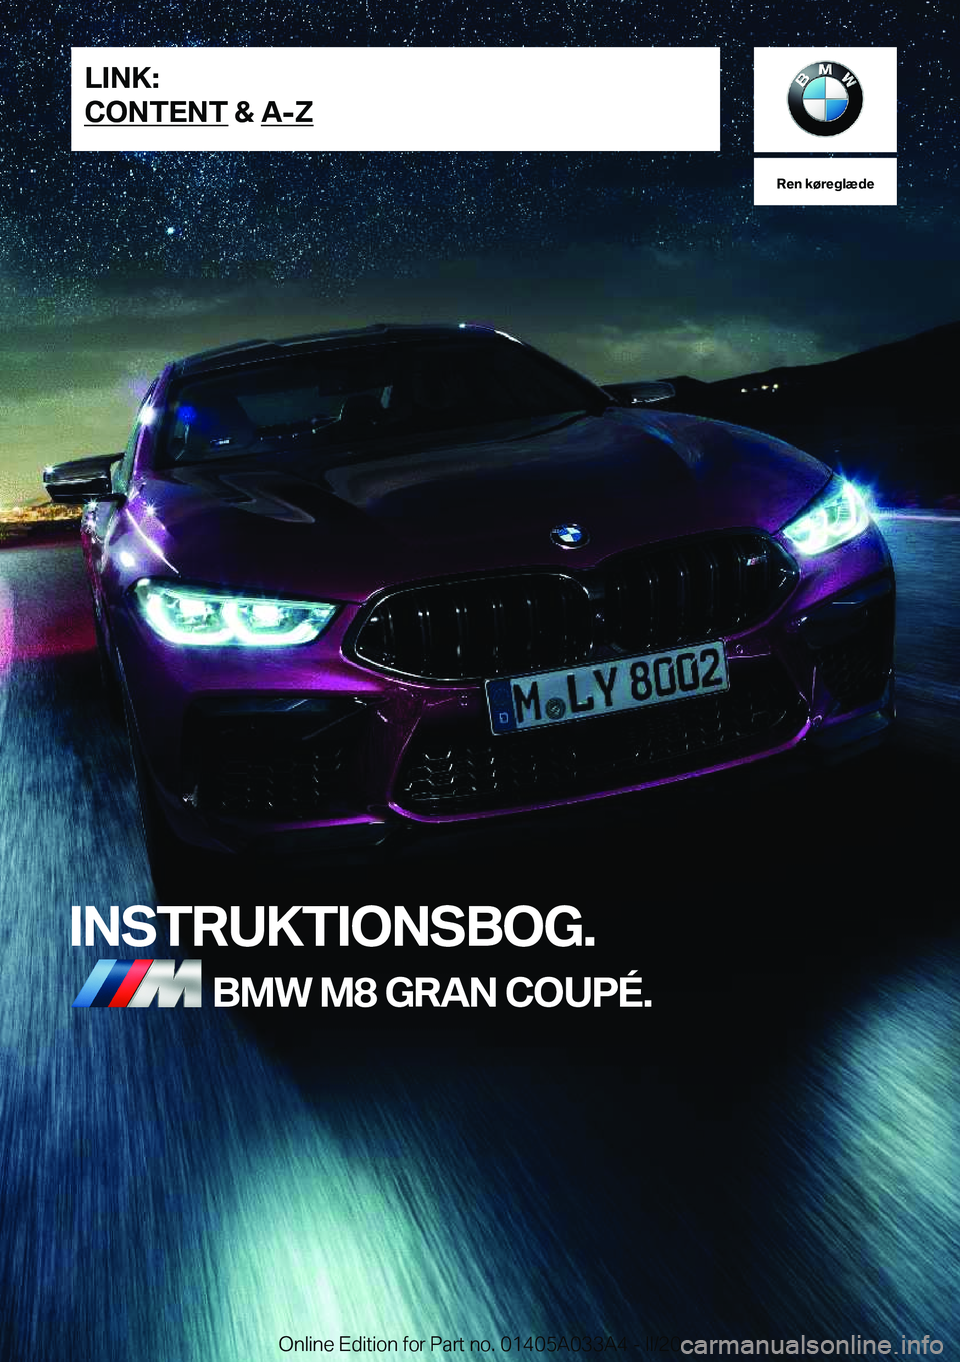 BMW M8 GRAN COUPE 2020  InstruktionsbØger (in Danish) �R�e�n��k�